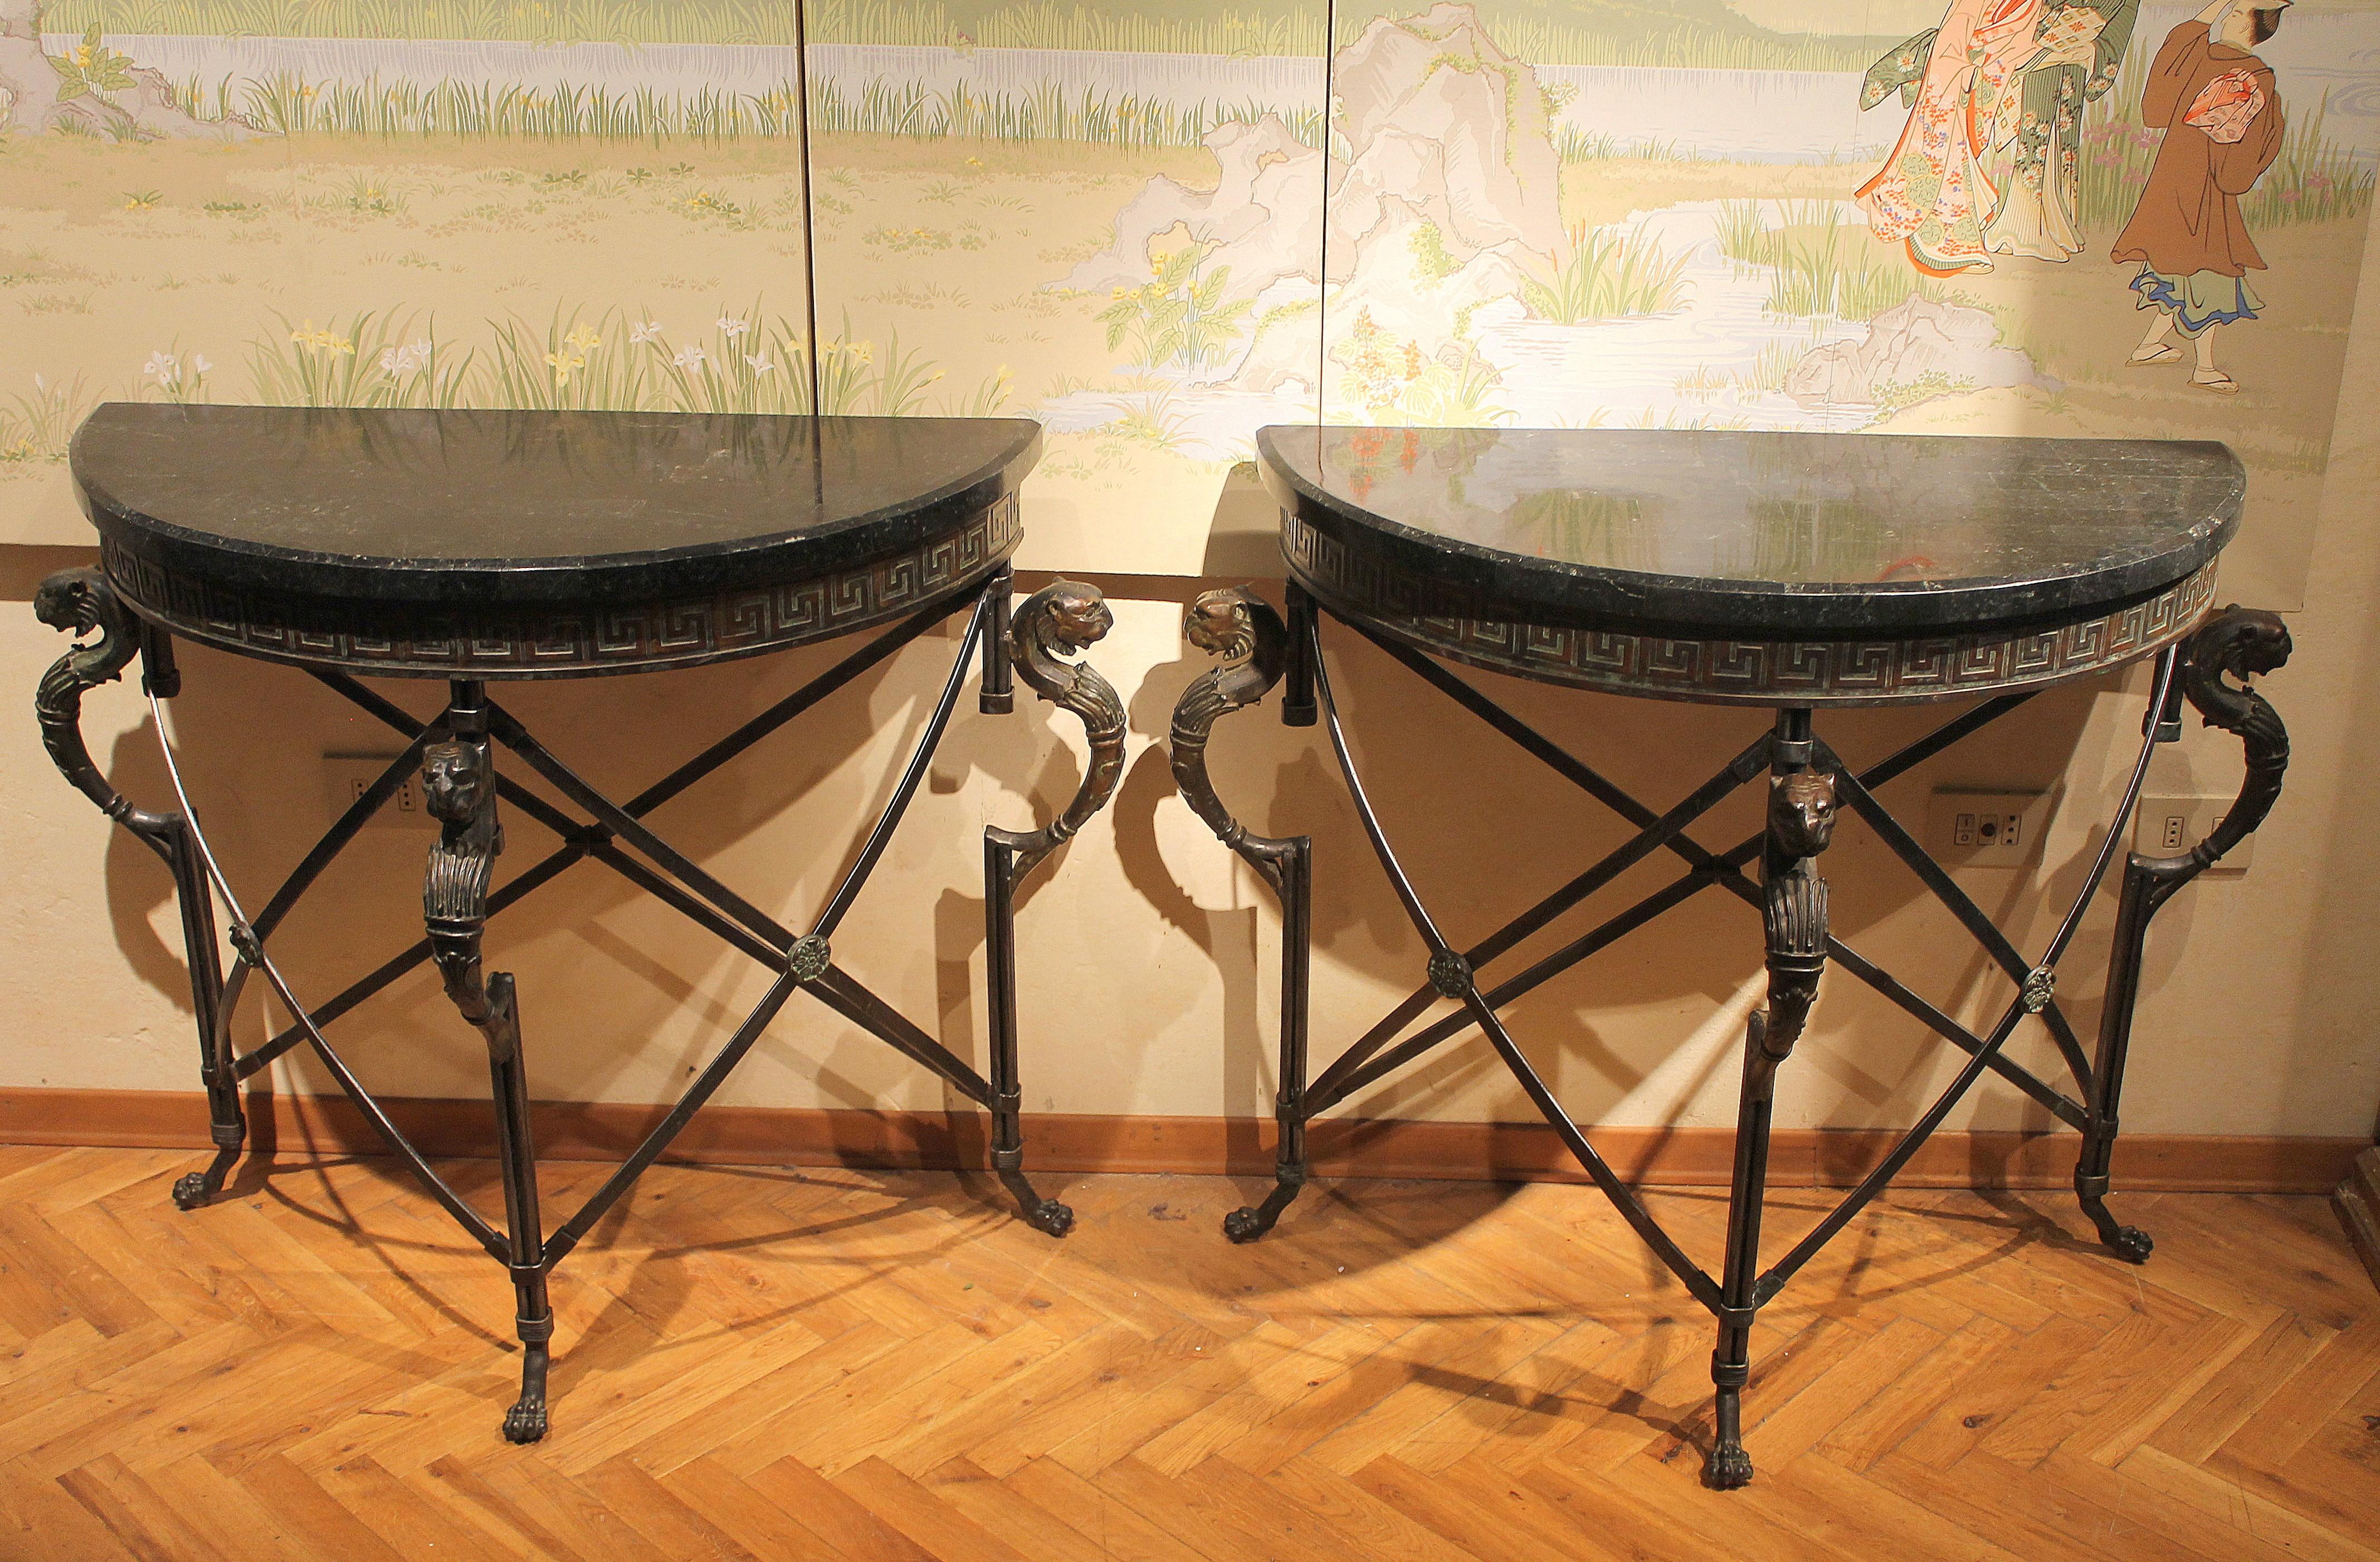 This early 20th century chic pair of Italian half moon design console tables are very interesting, extremely detailed and well proportioned.
The X-shaped stretcher structure is made of wrought iron, three casted bronze griffin decorations are